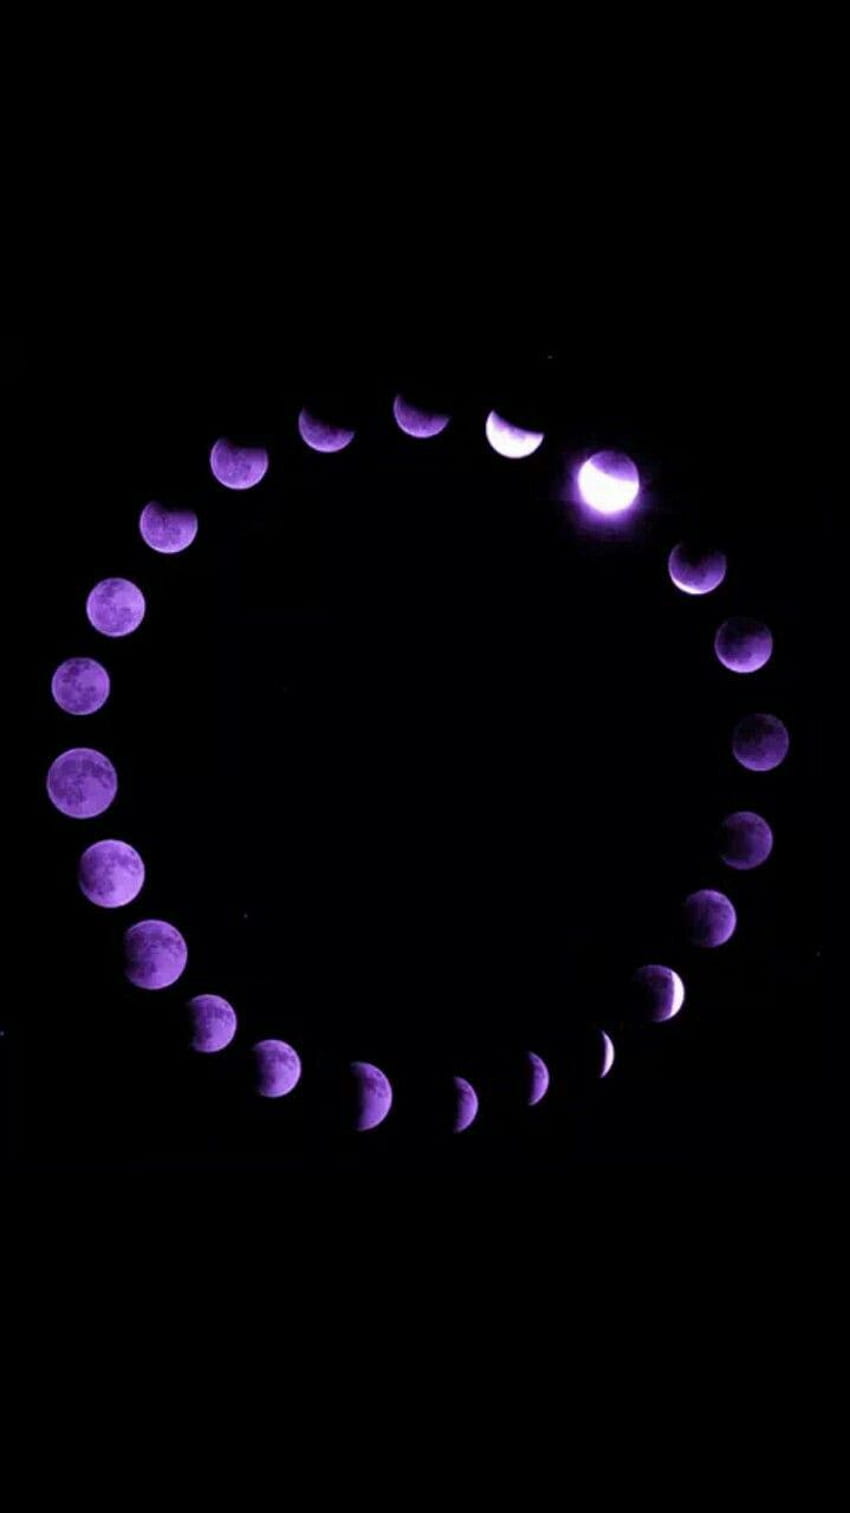 The phases of a lunar eclipse - Magic, purple, dark purple, moon phases